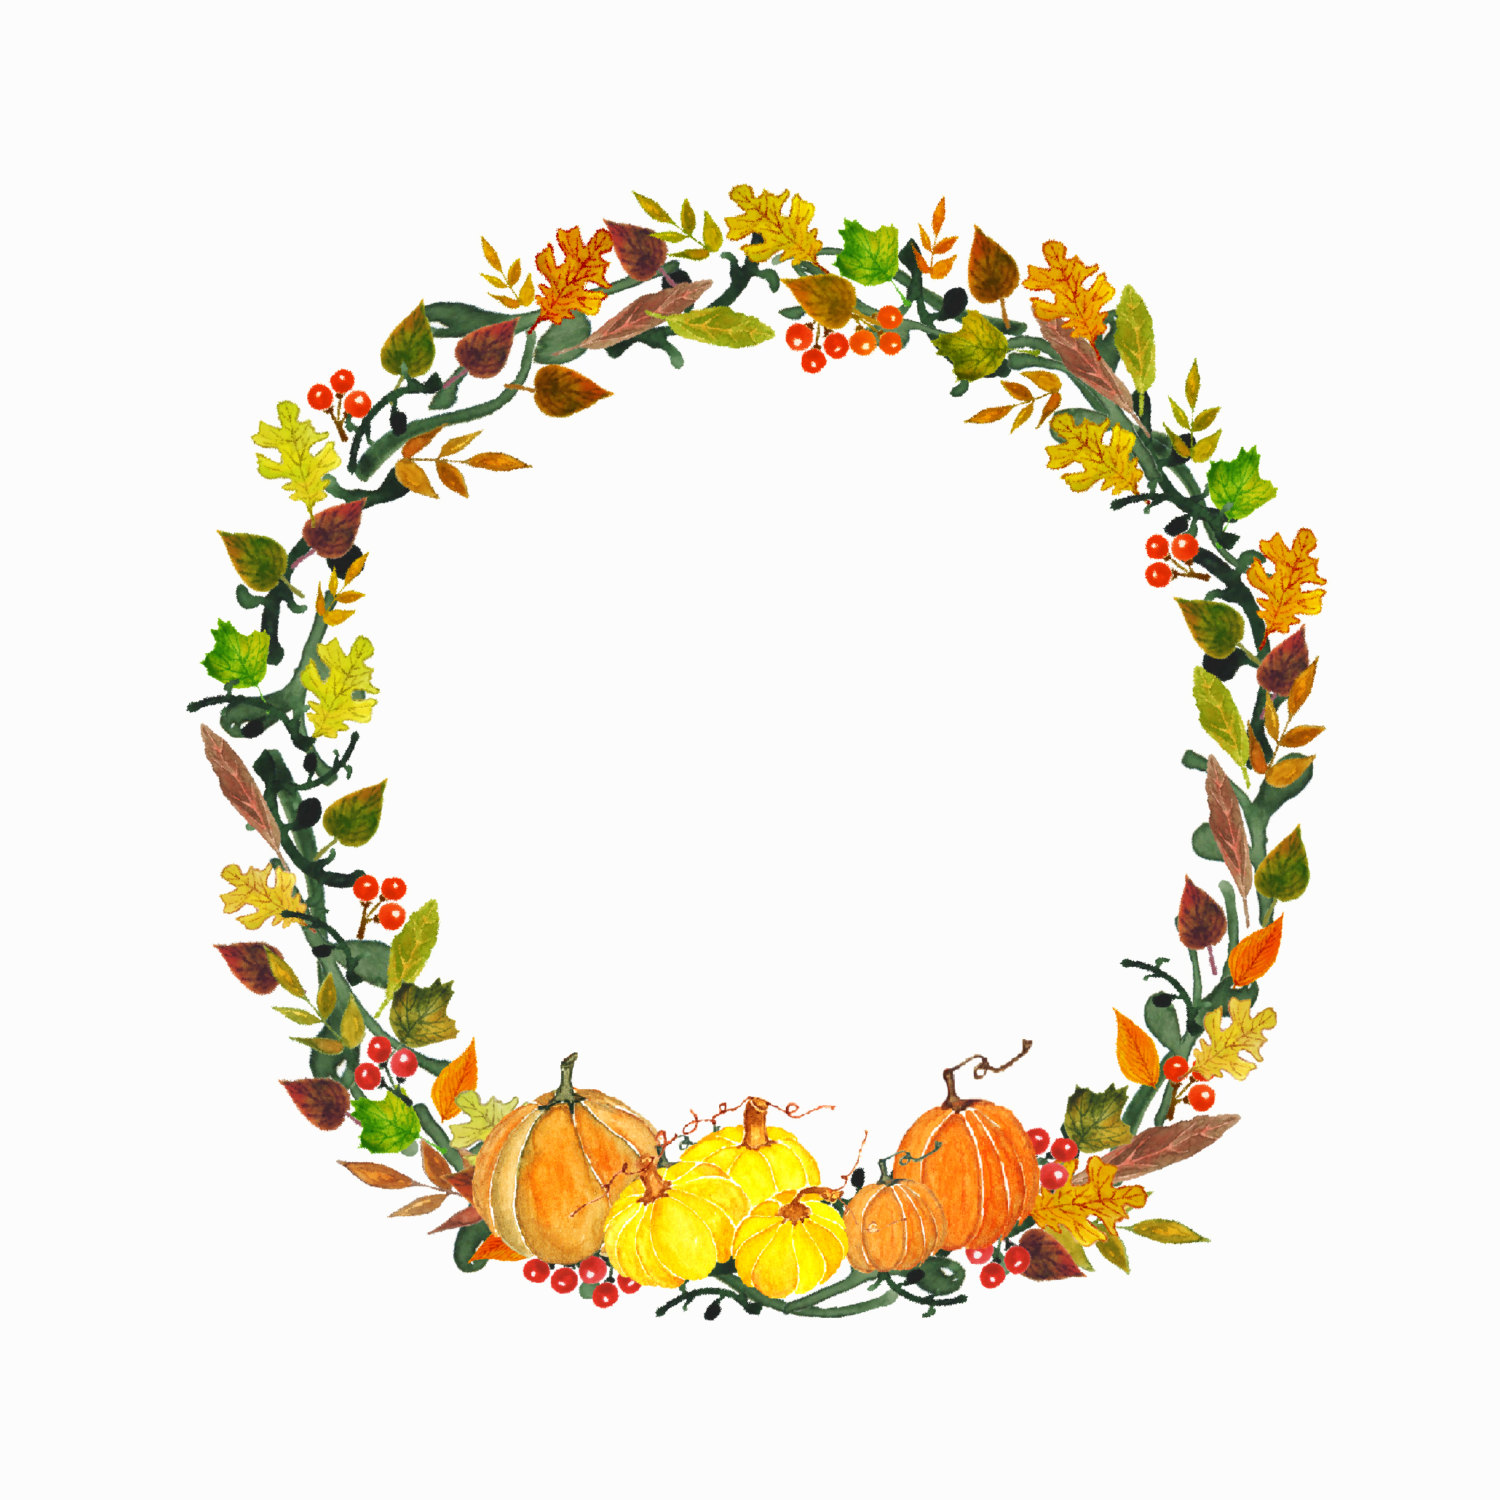 Popular items for autumn clipart on Etsy